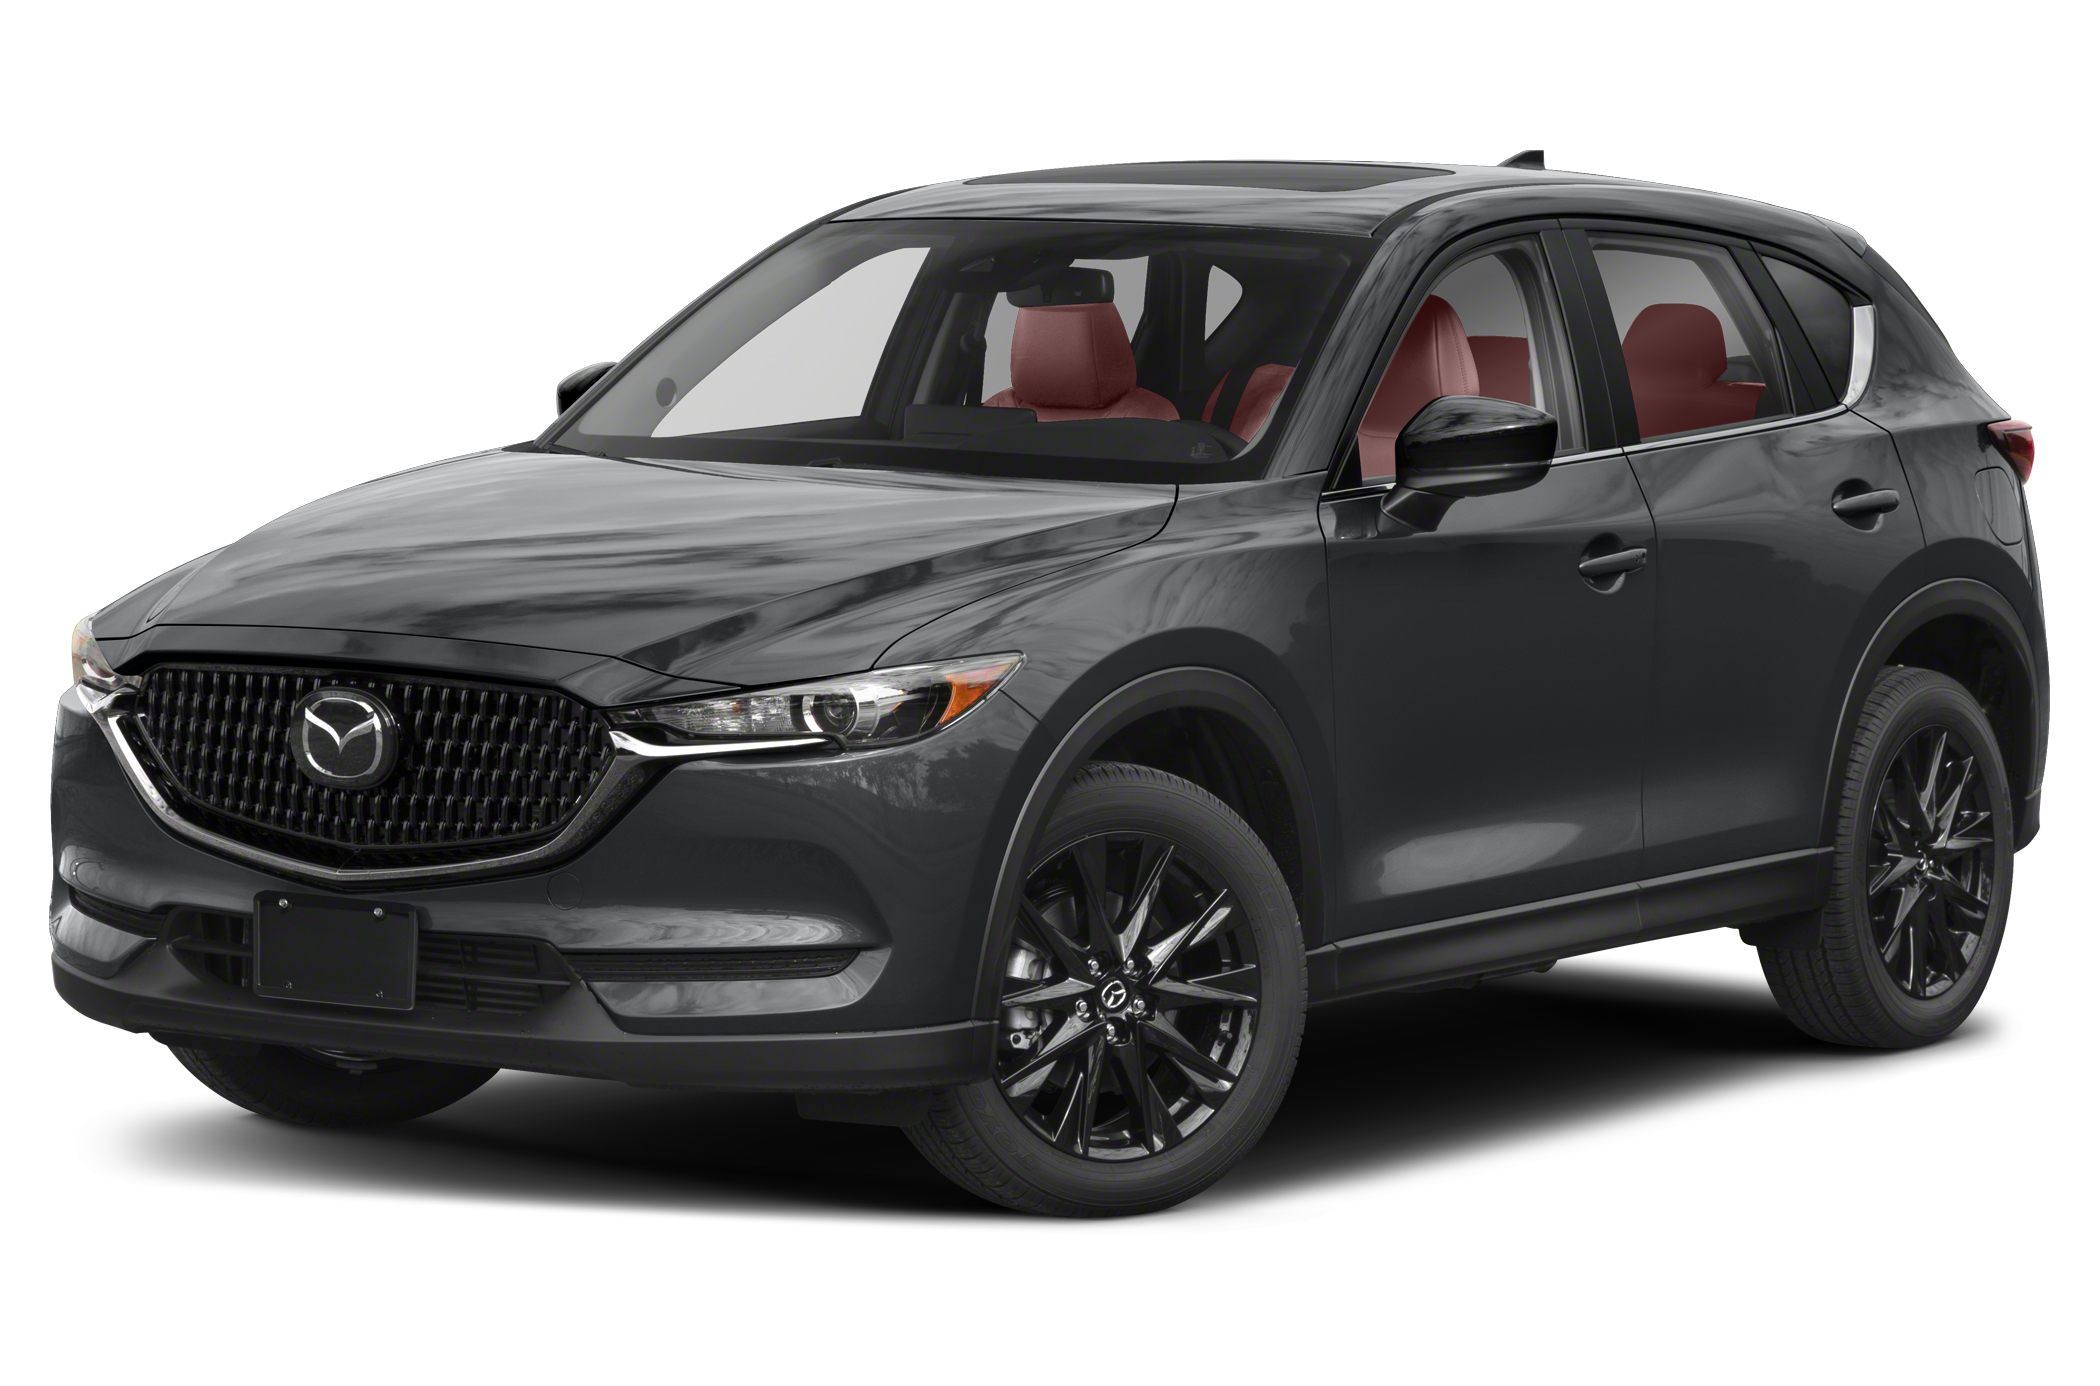 Mazda cx 5 carbon edition with red interior lgname